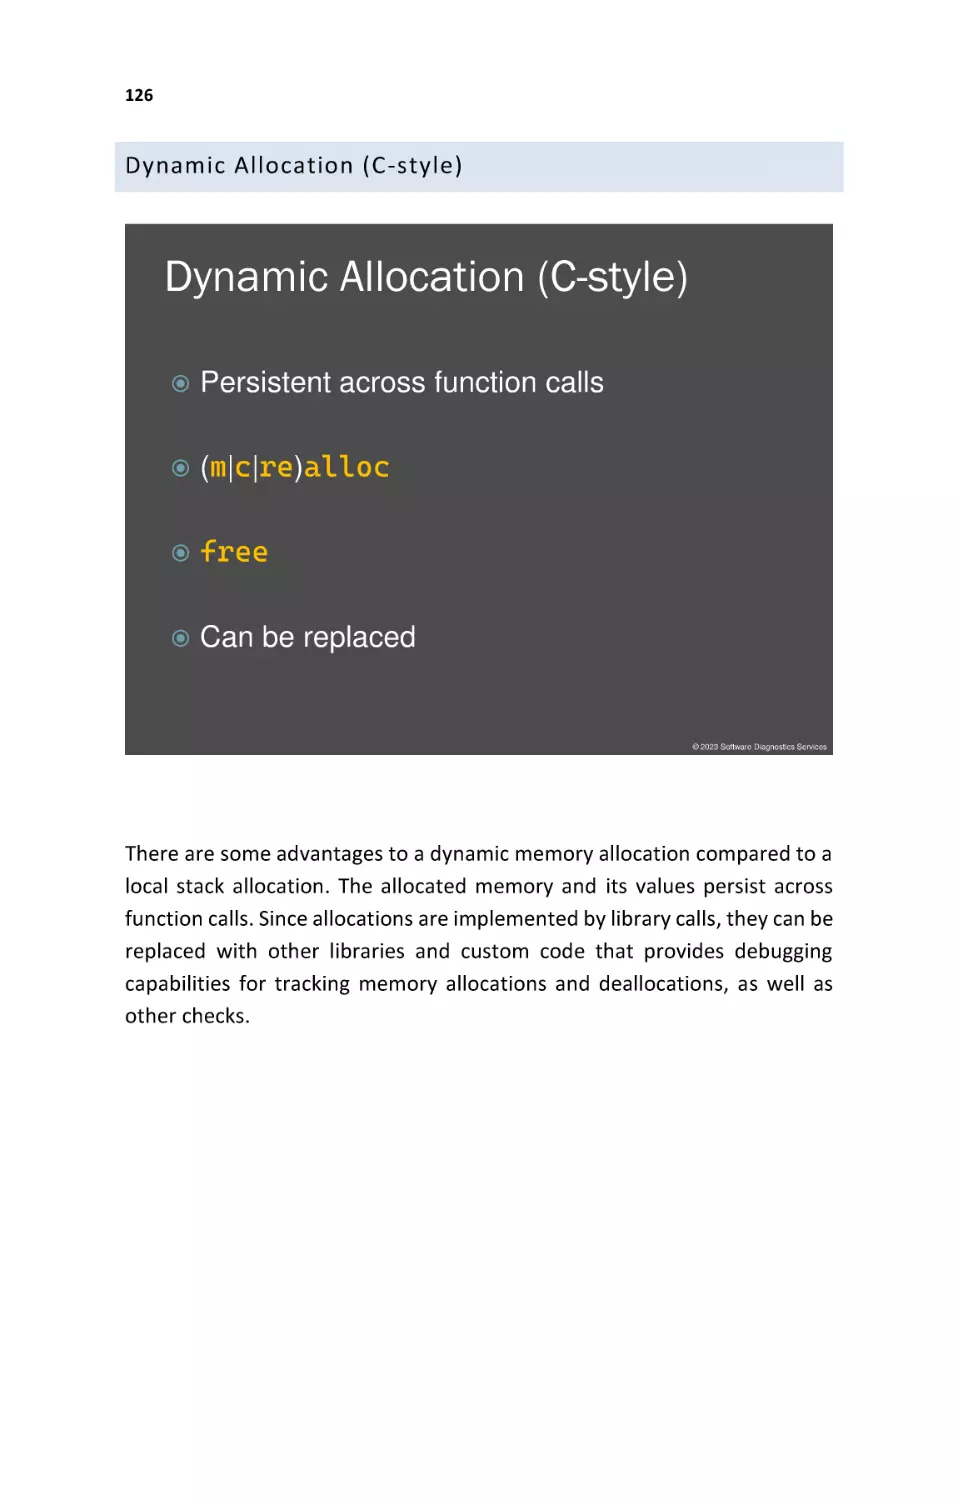 Dynamic Allocation (C-style)